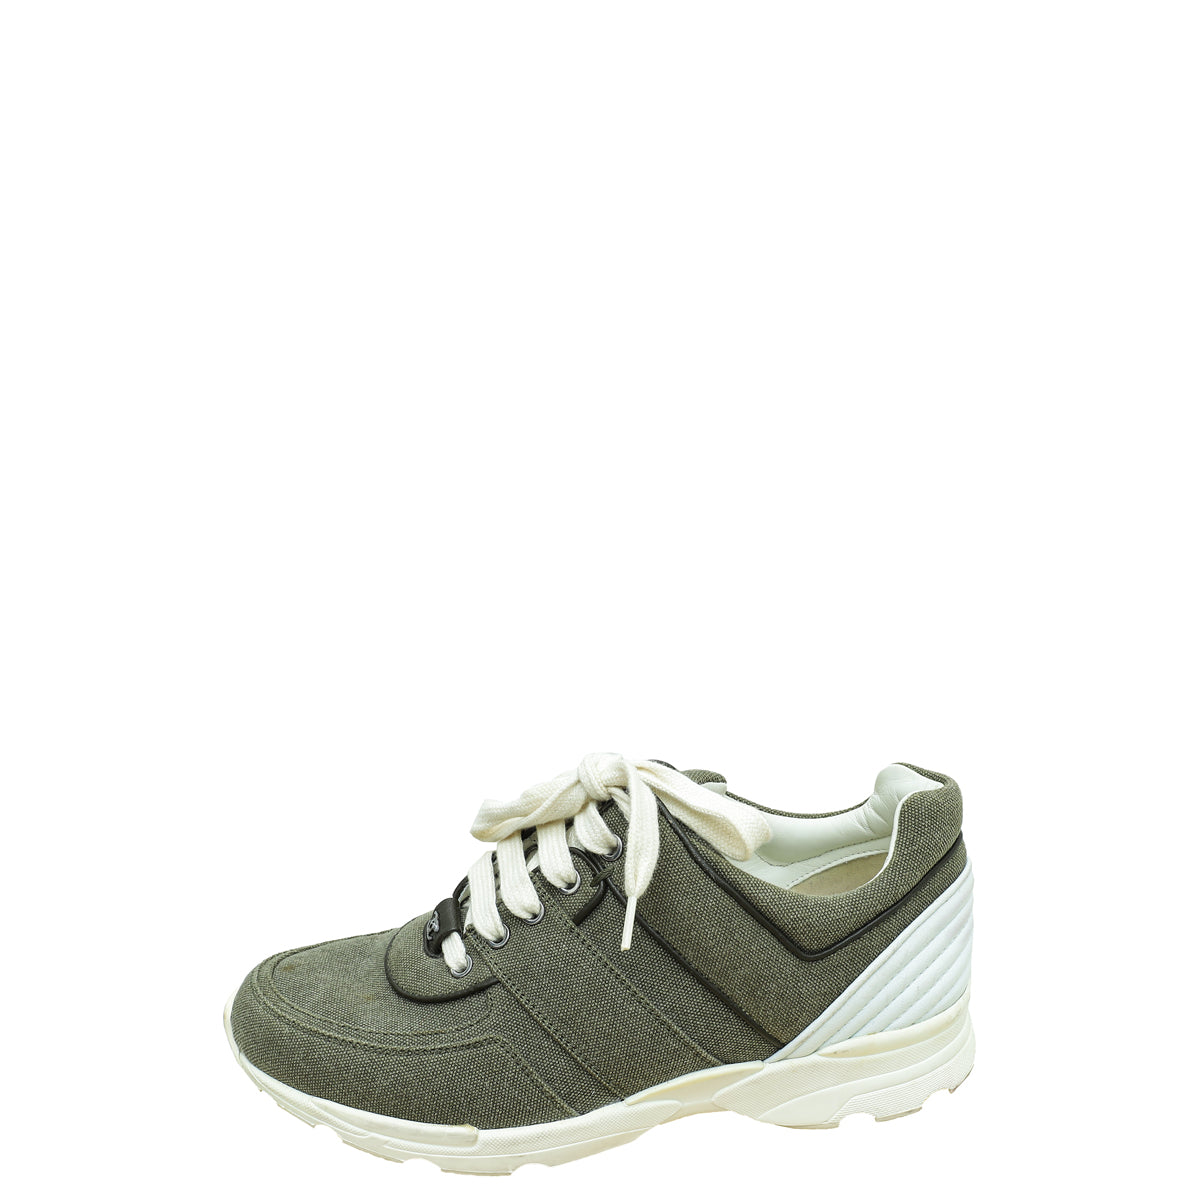 Chanel Light Military Green CC Lace Up Sneakers 38.5